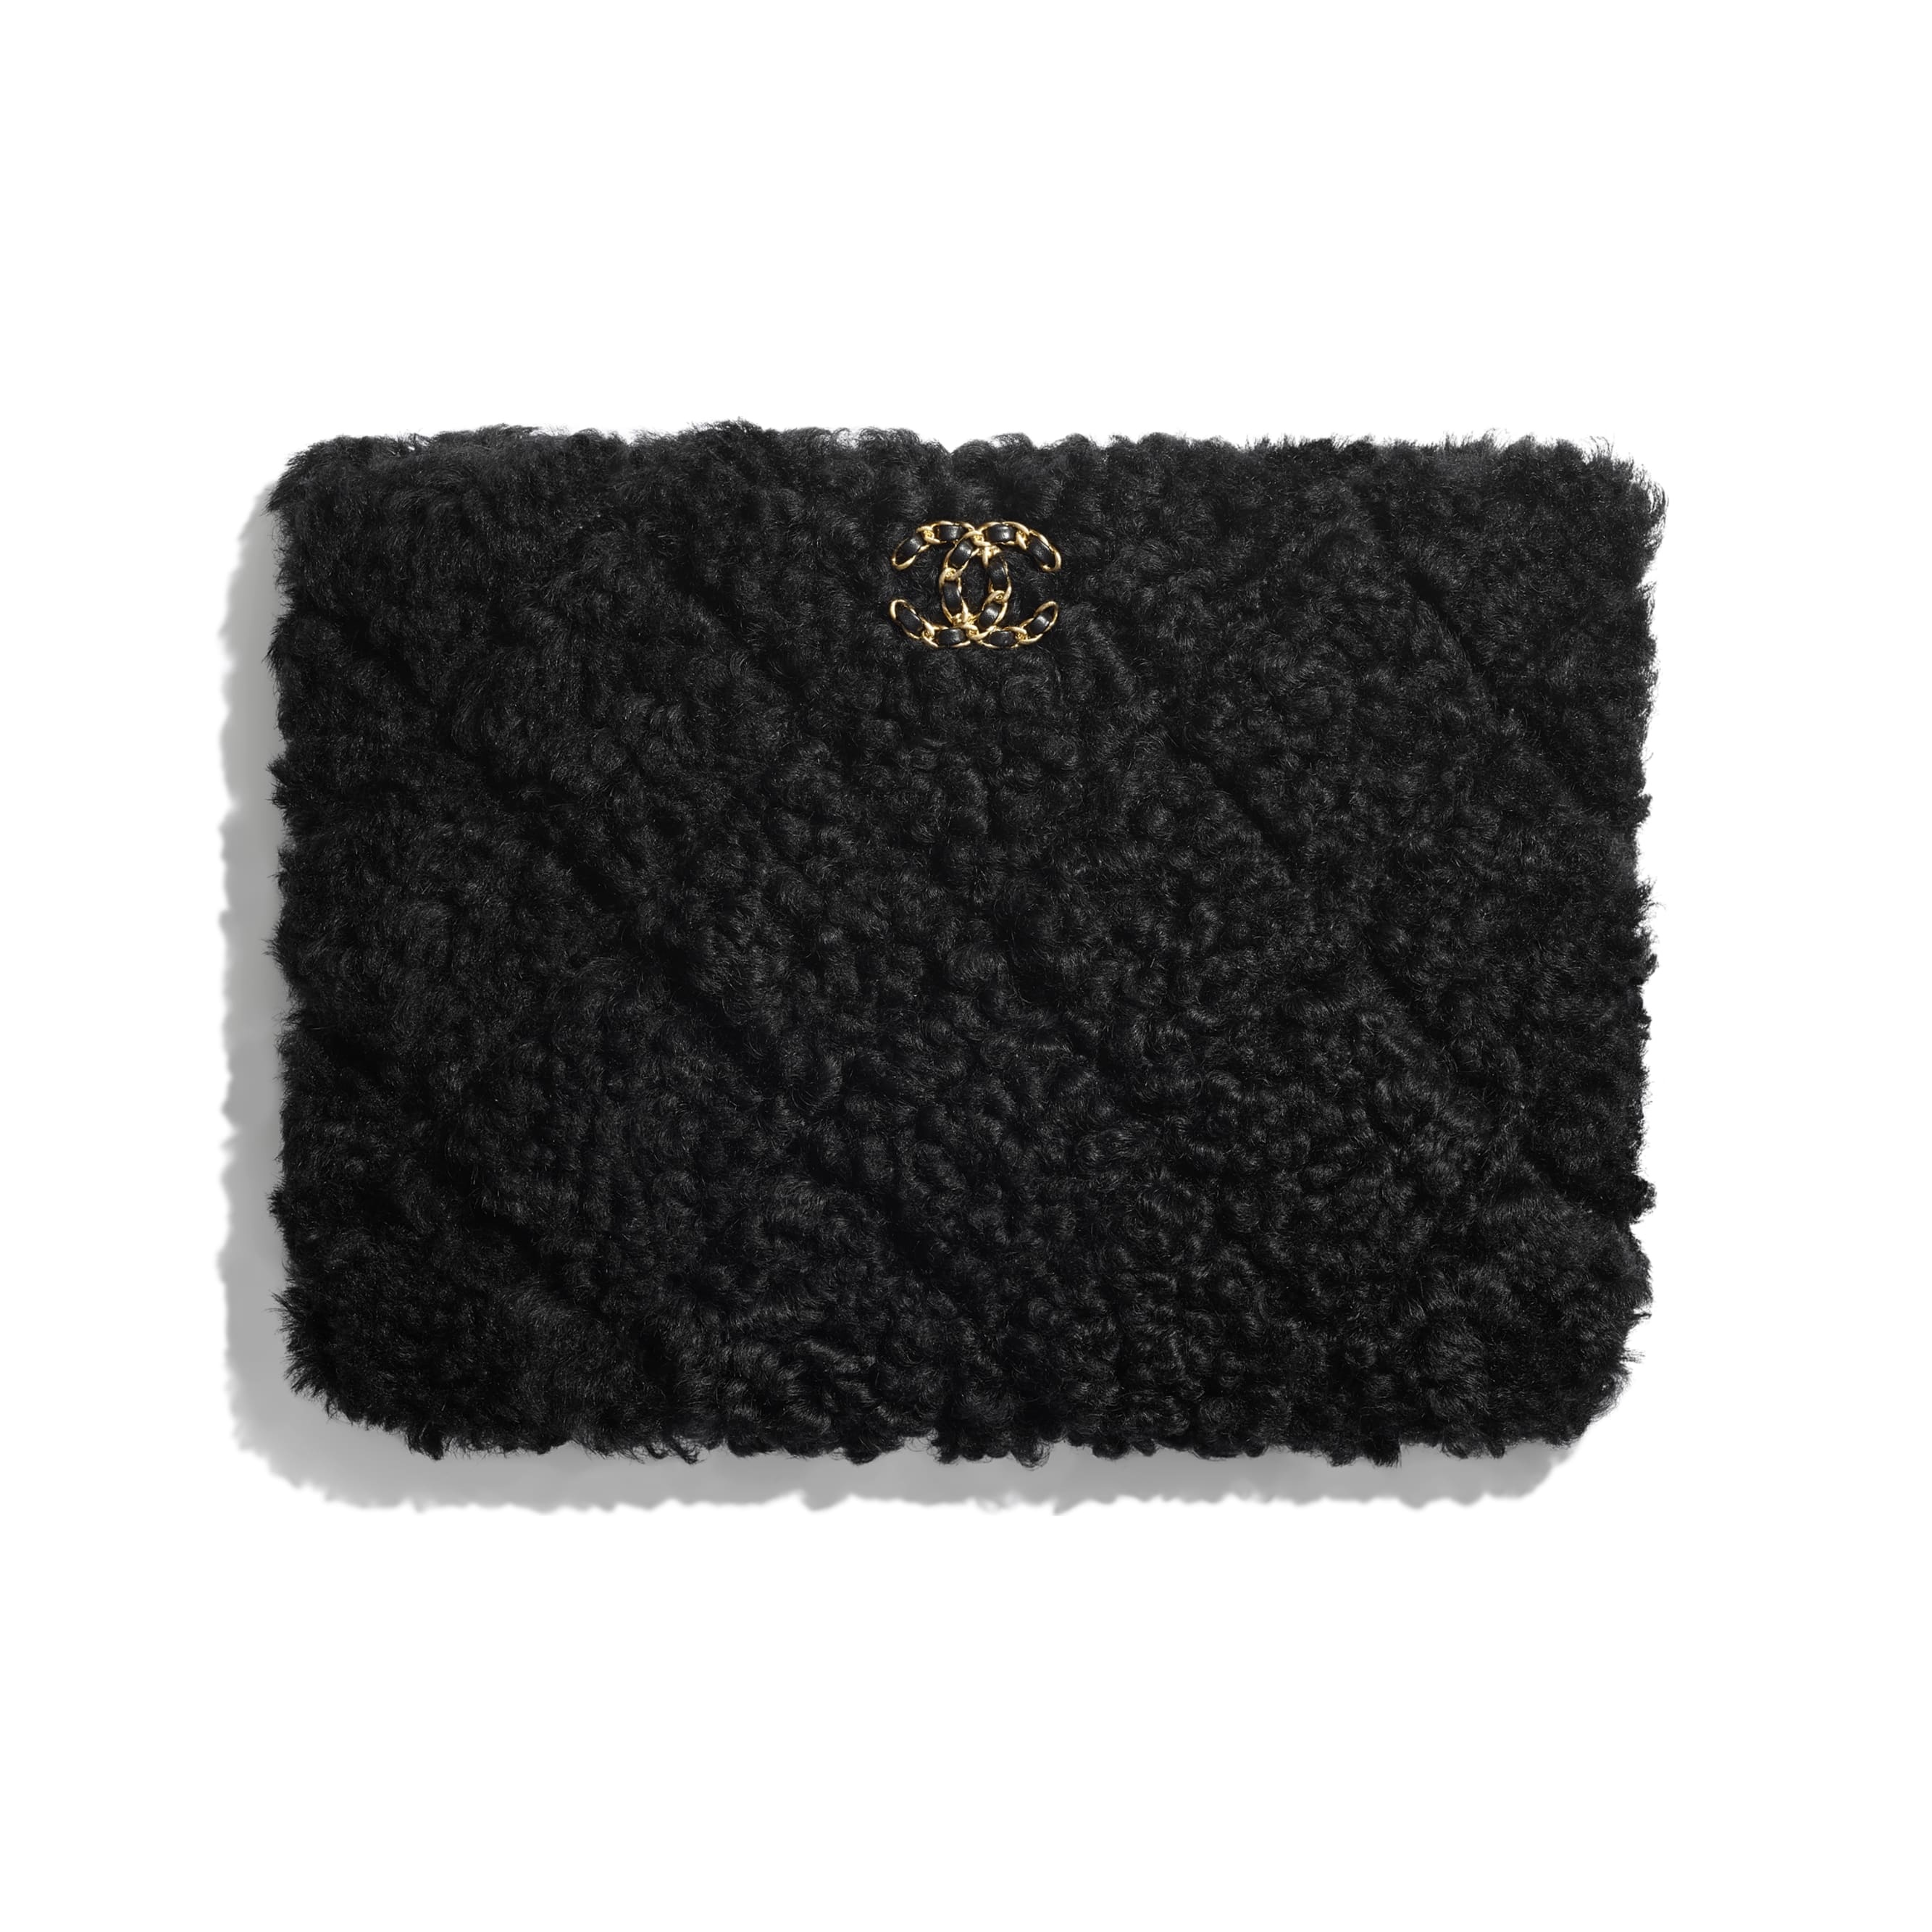 CHANEL 19 Pouch - 1